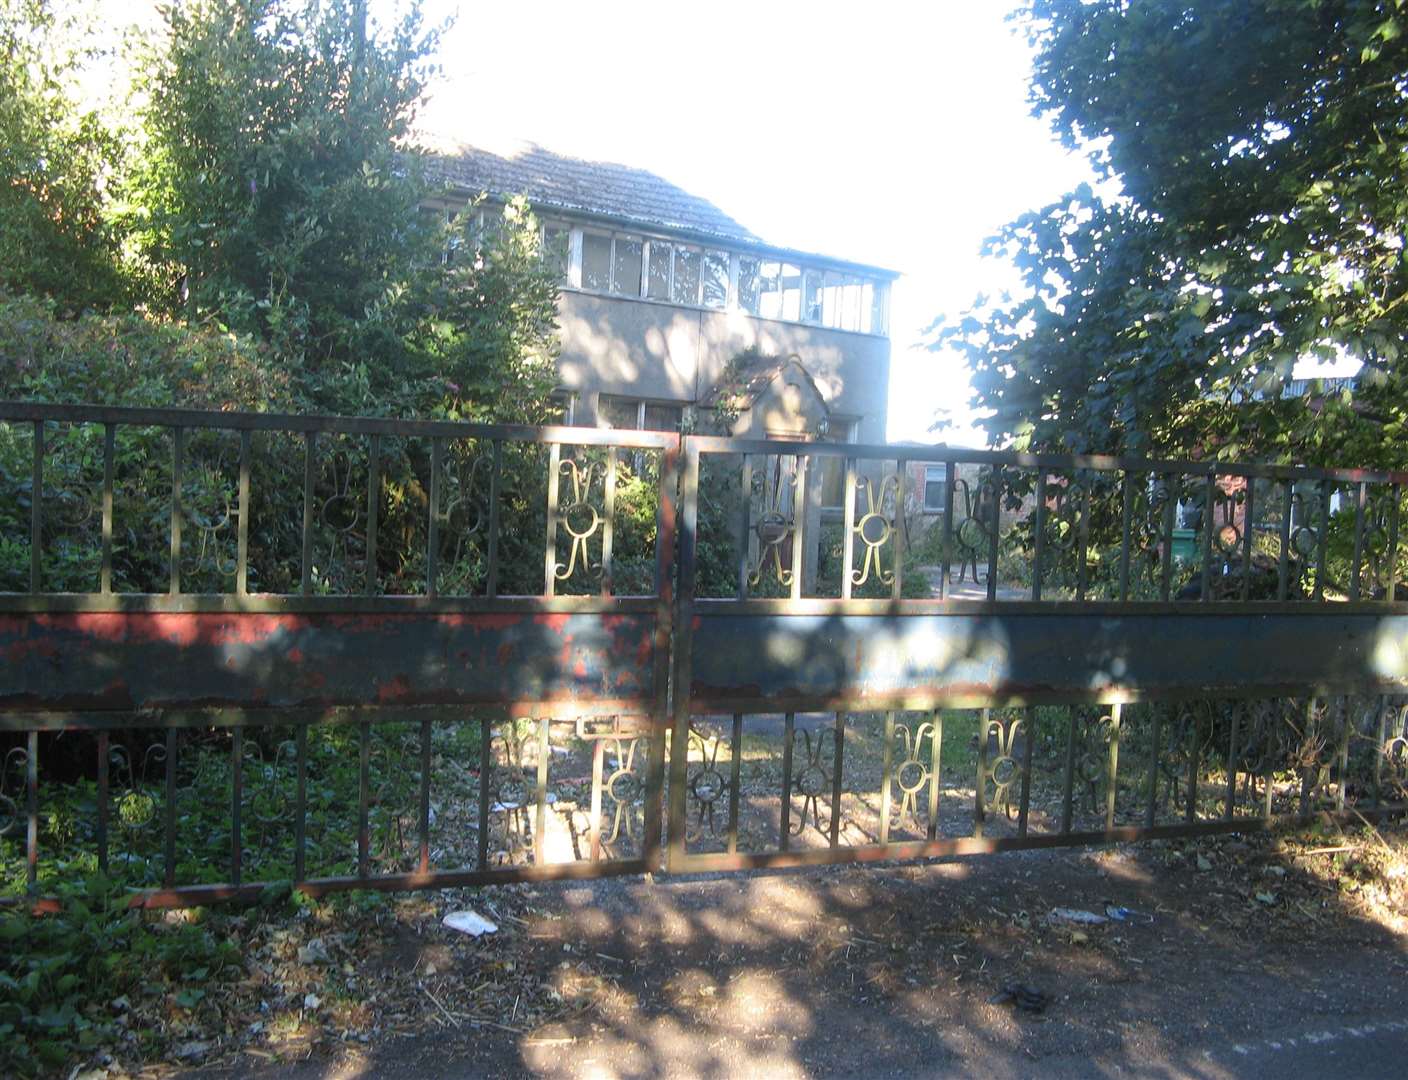 Beck also owns a dilapidated cottage near Westfield Sole Farm, in Harp Farm Road, Boxley